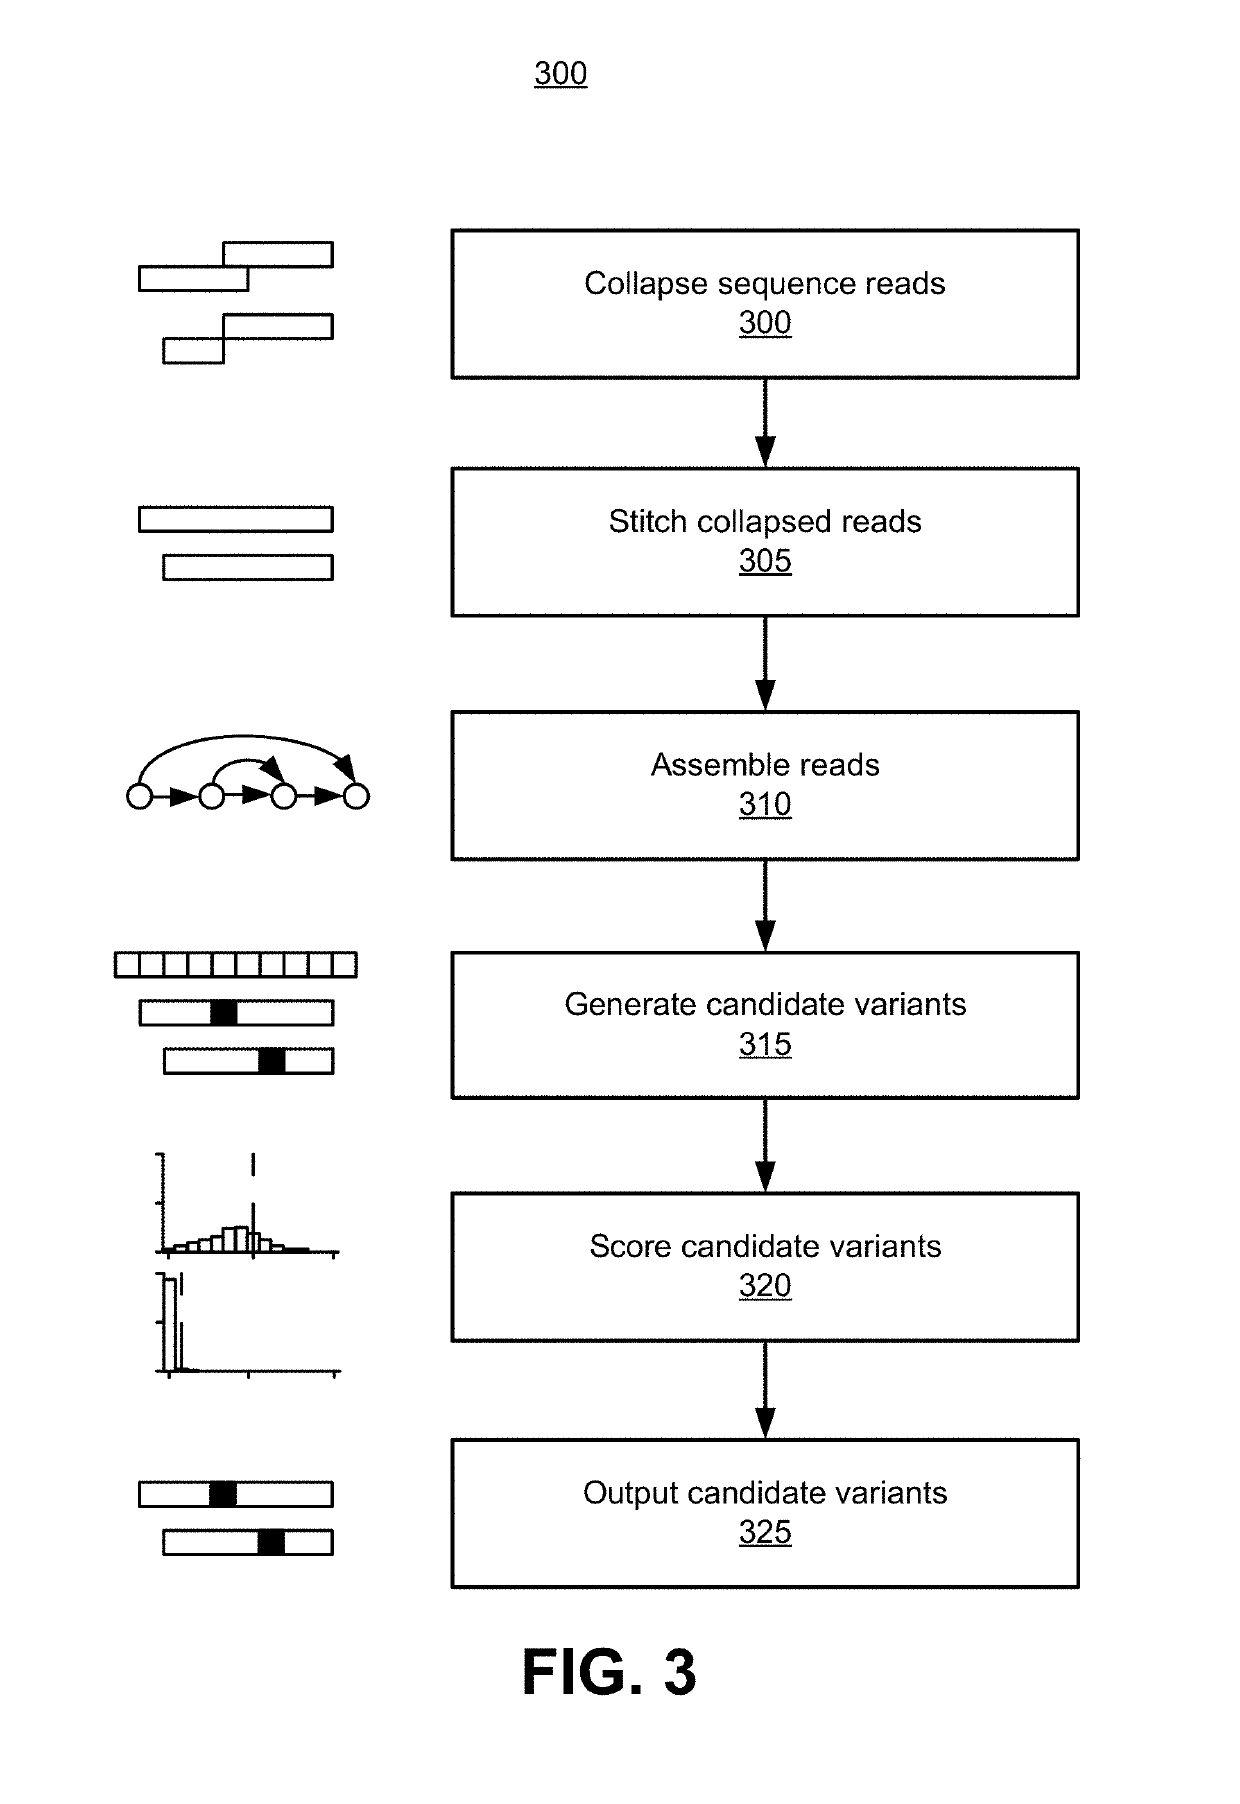 Site-specific noise model for targeted sequencing